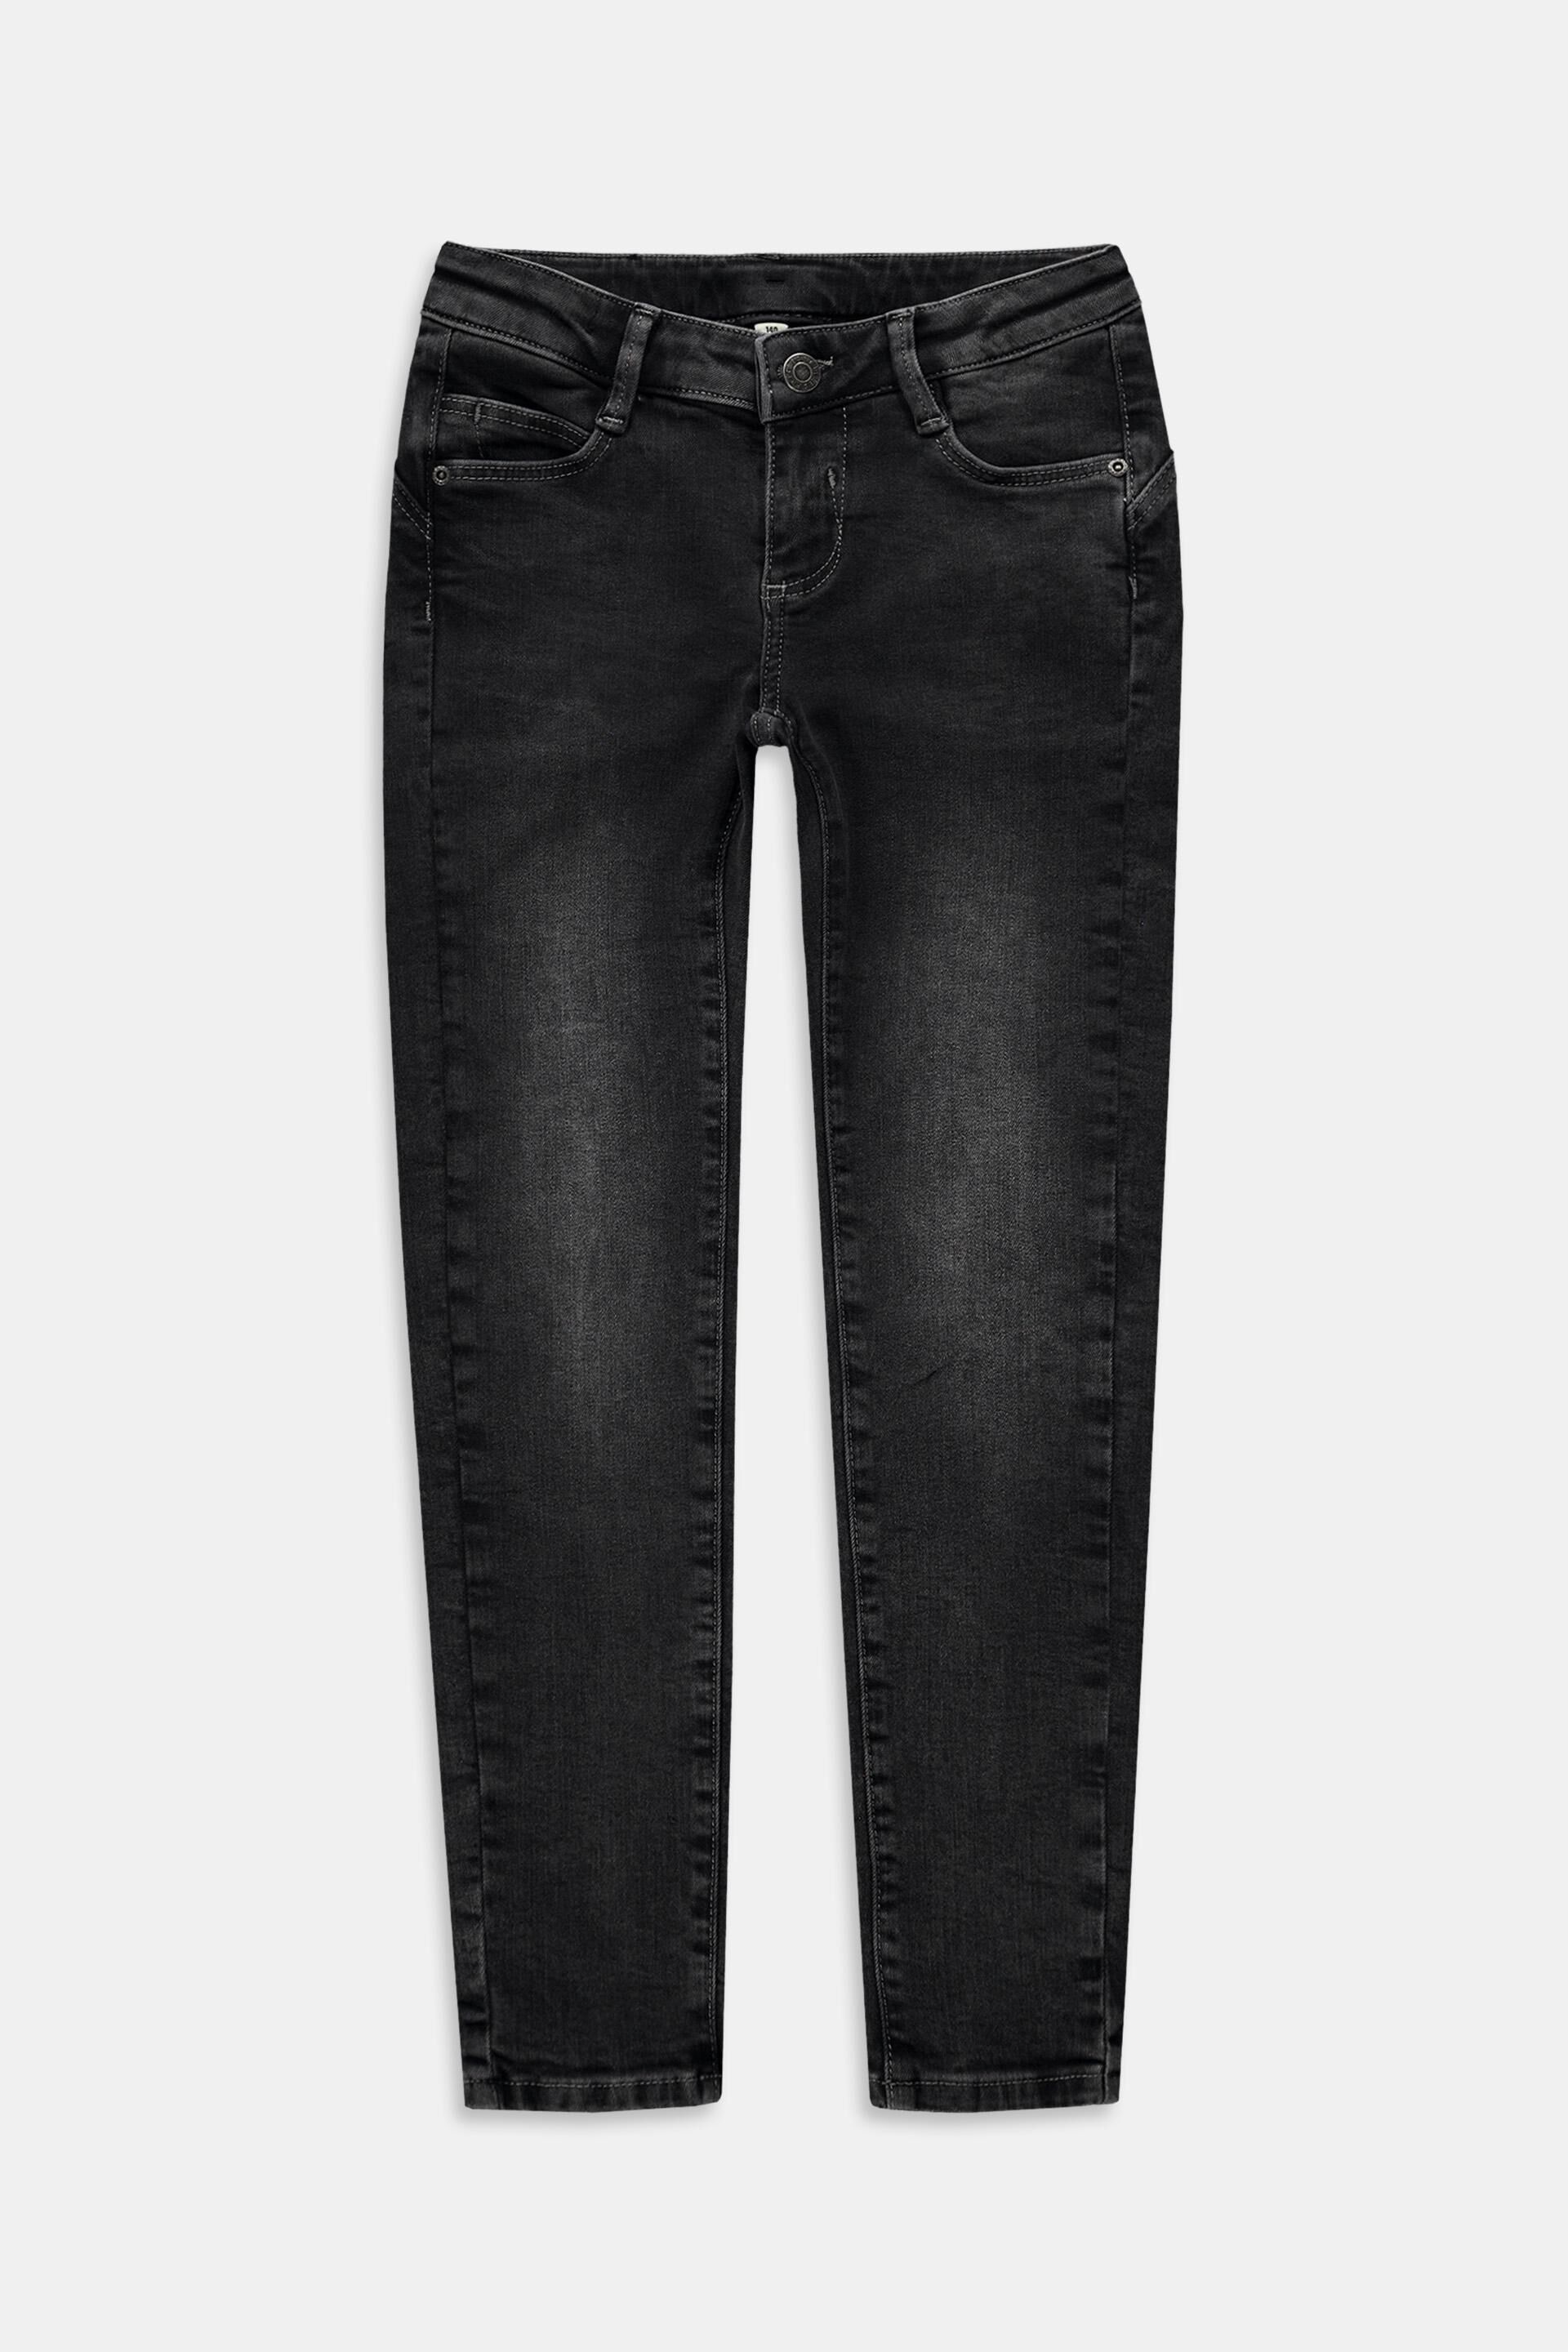 Esprit jeans Skinny fit with adjustable waistband